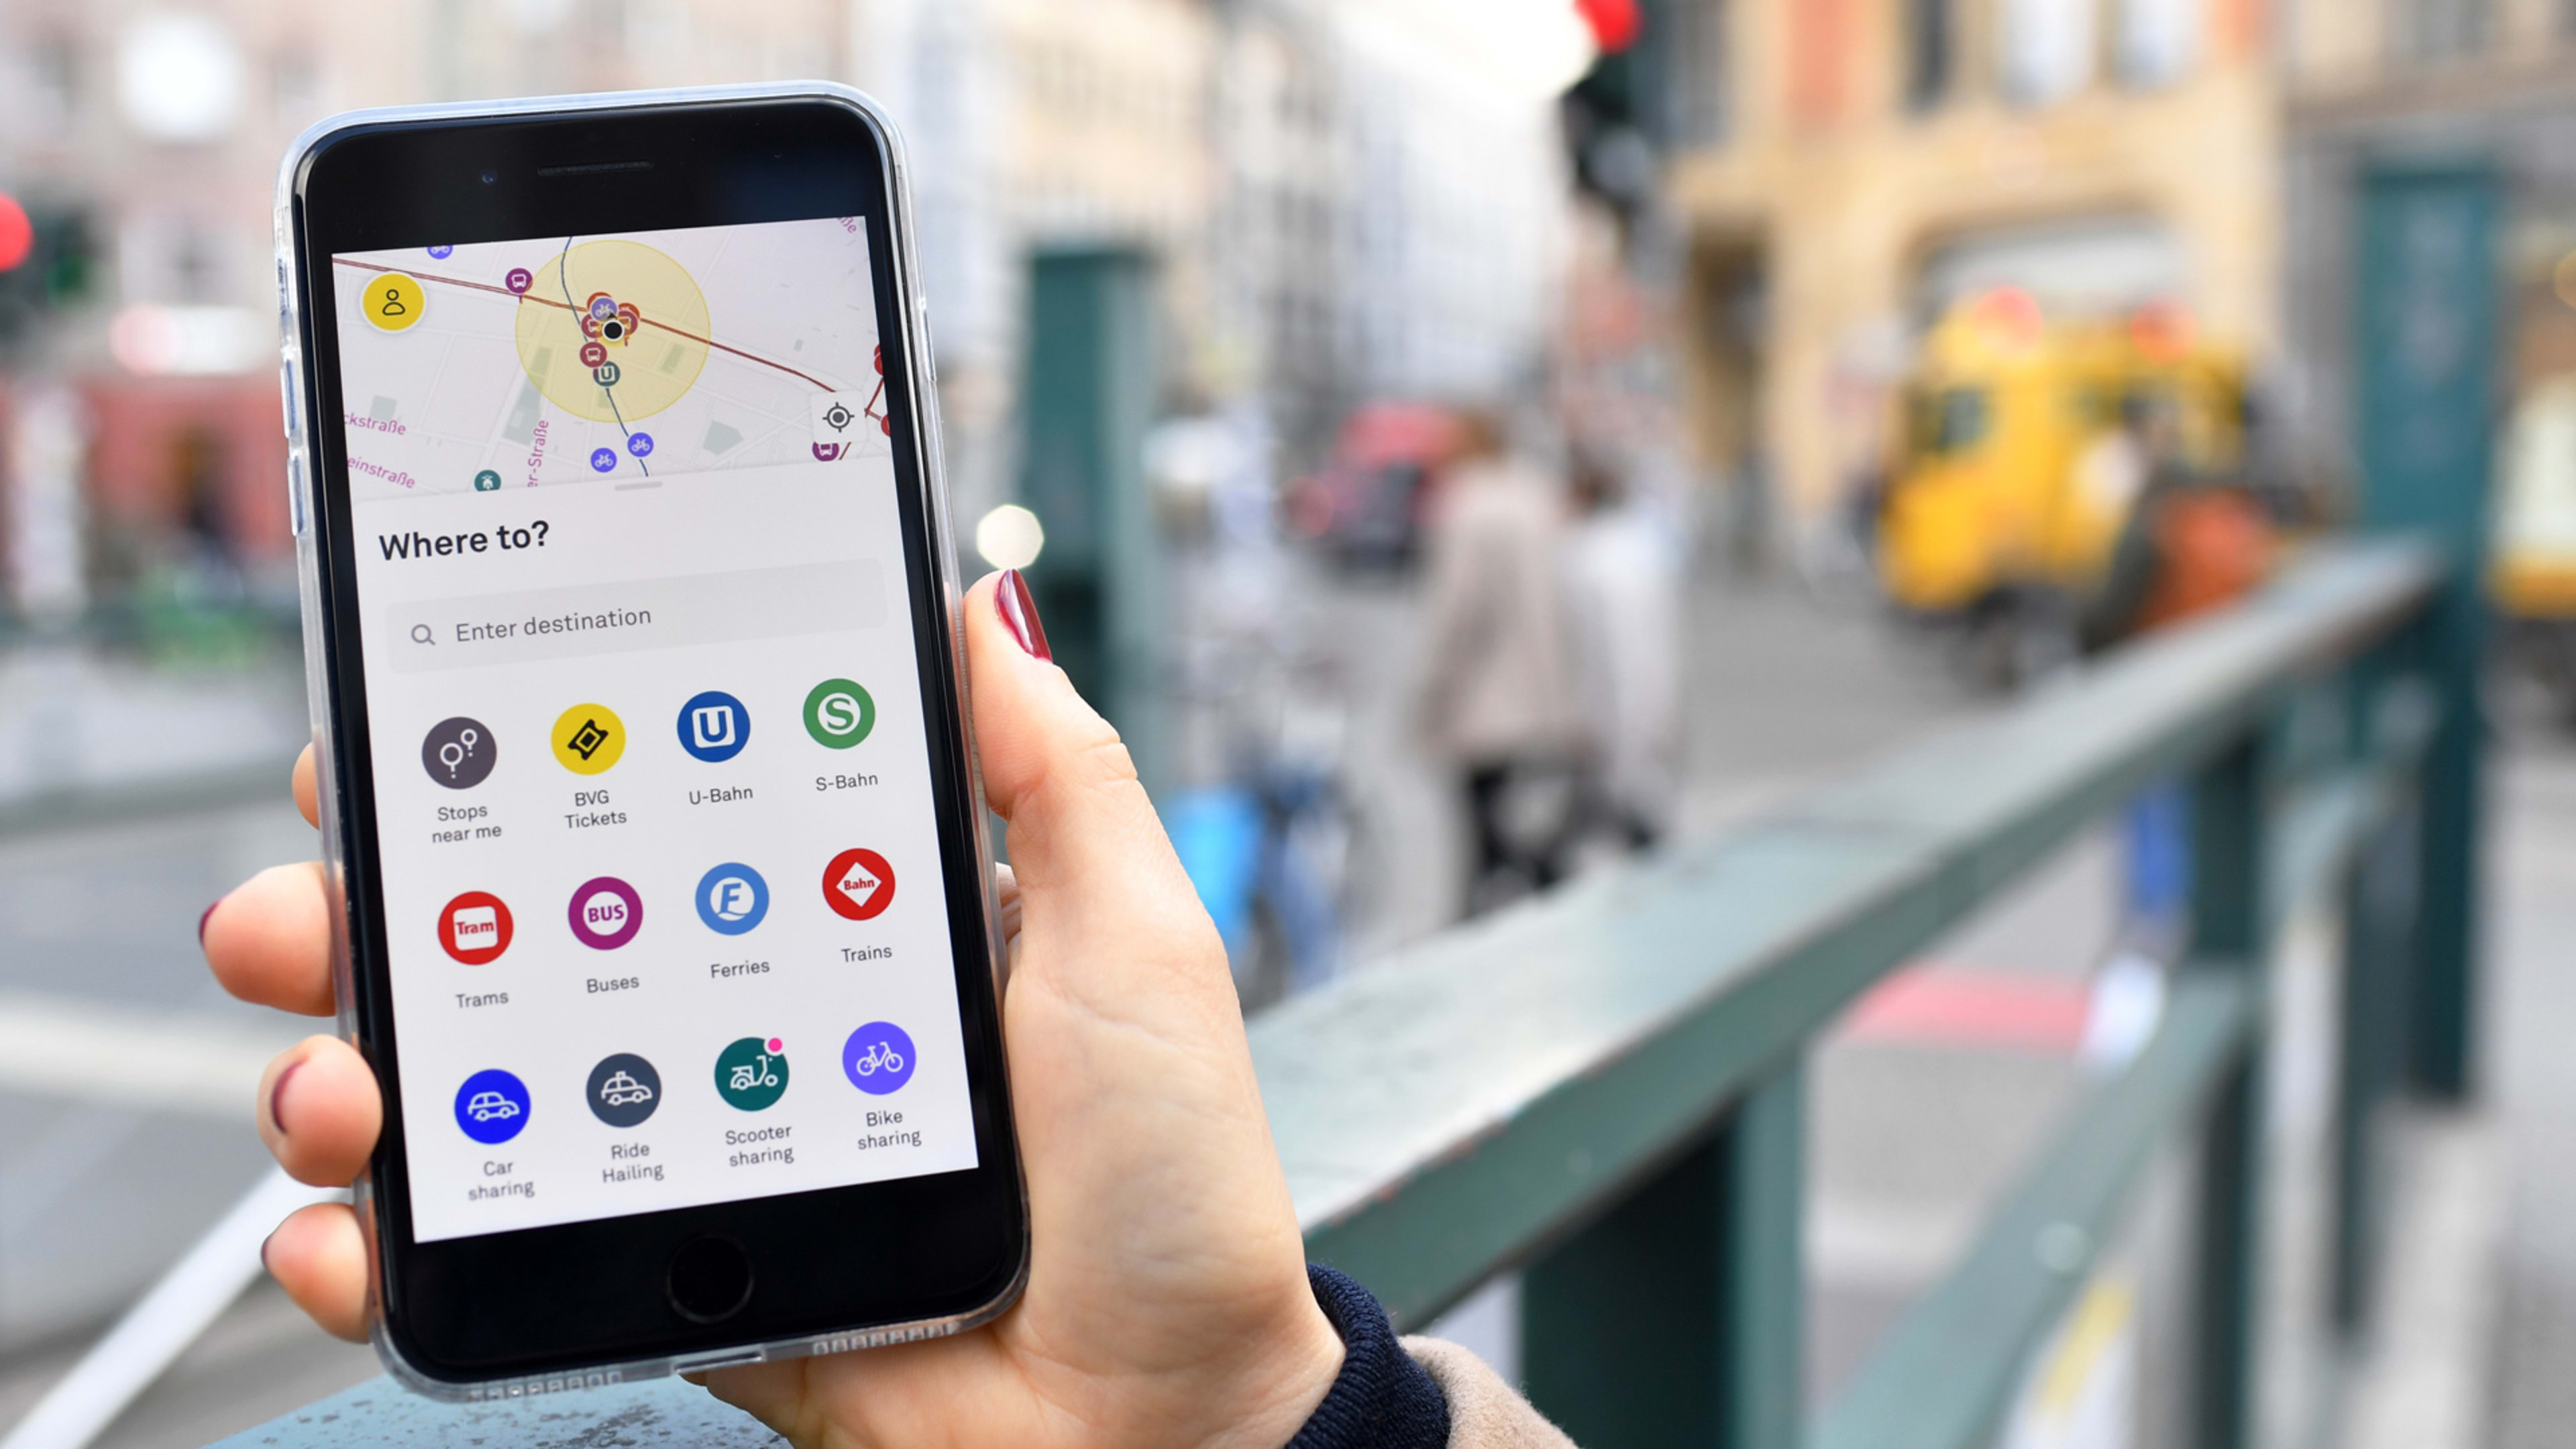 In Berlin, there’s now one app to access every mode of transportation